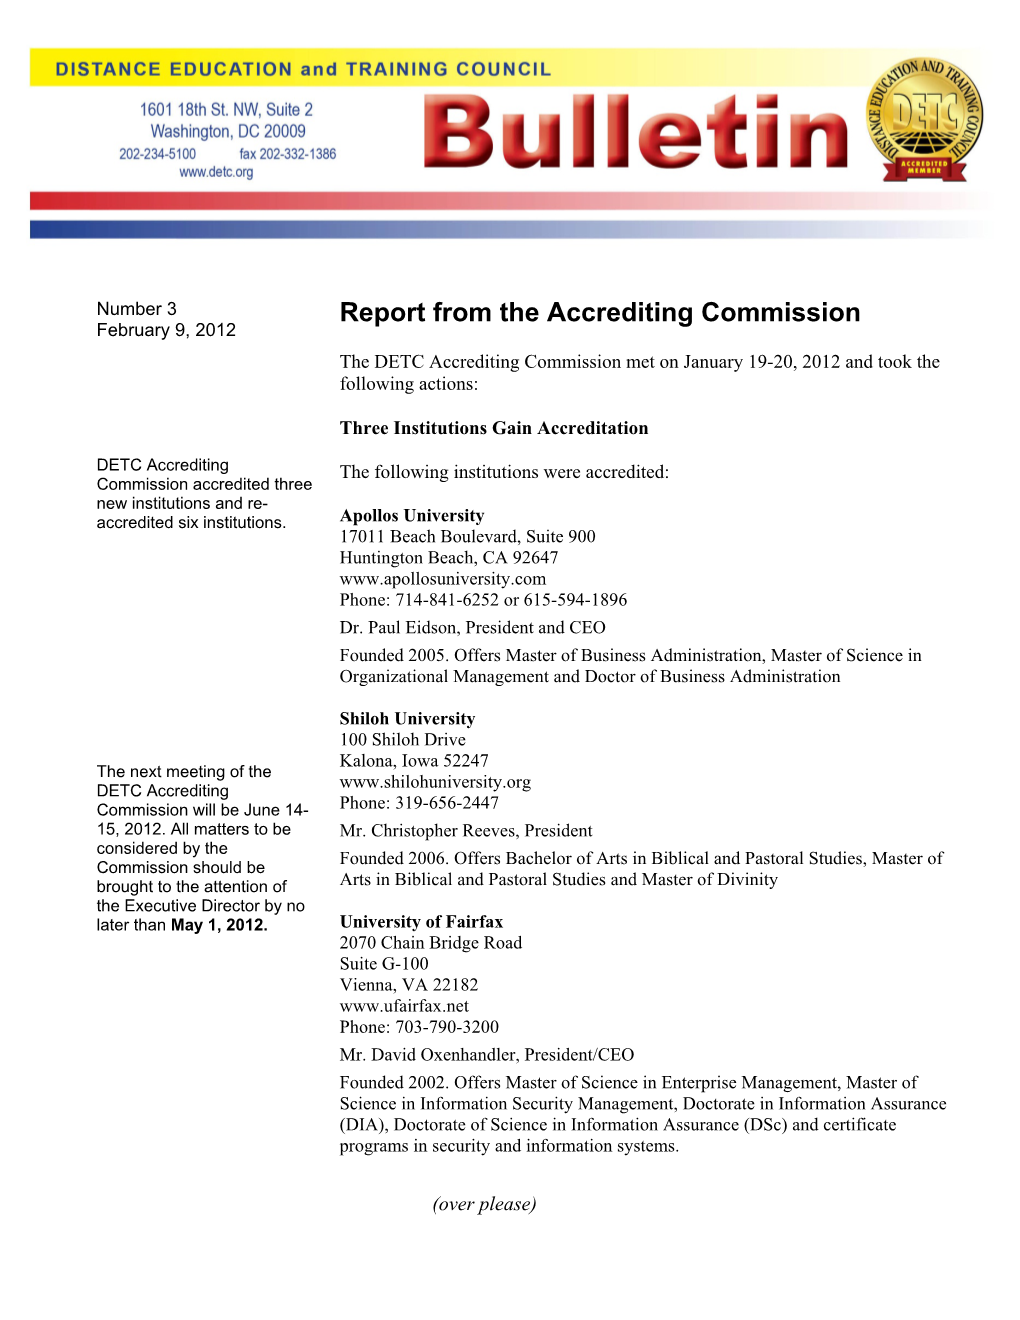 Report from the Accrediting Commission February 9, 2012 the DETC Accrediting Commission Met on January 19-20, 2012 and Took the Following Actions